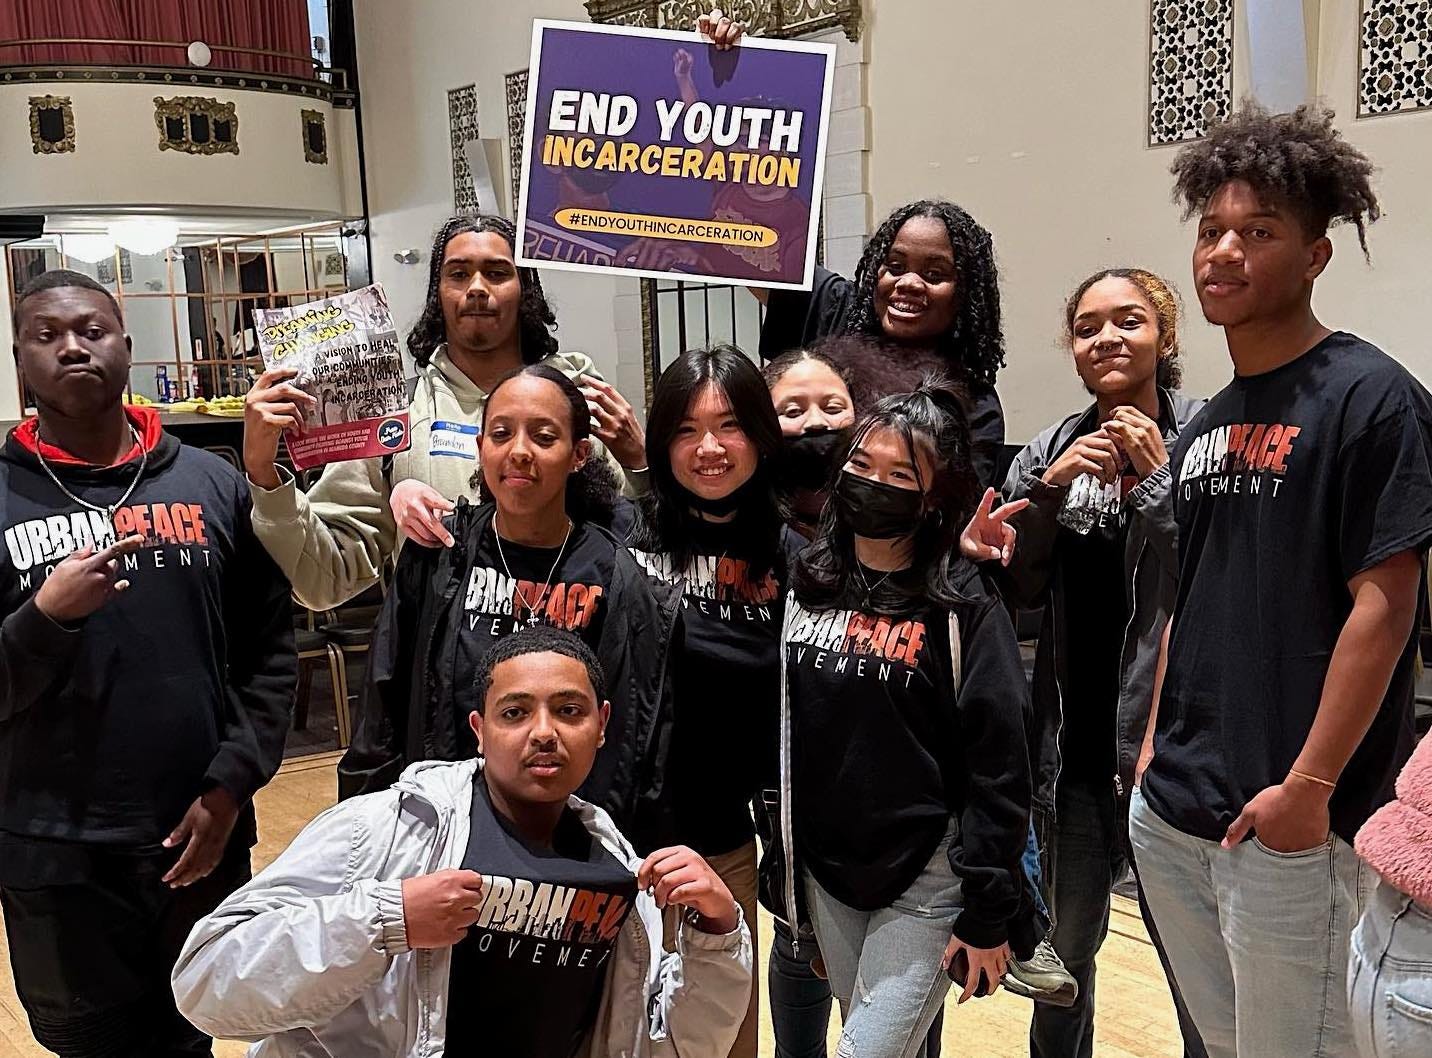 a group of young people in UPM t-shirts holding a sign "End Youth Incarceration"